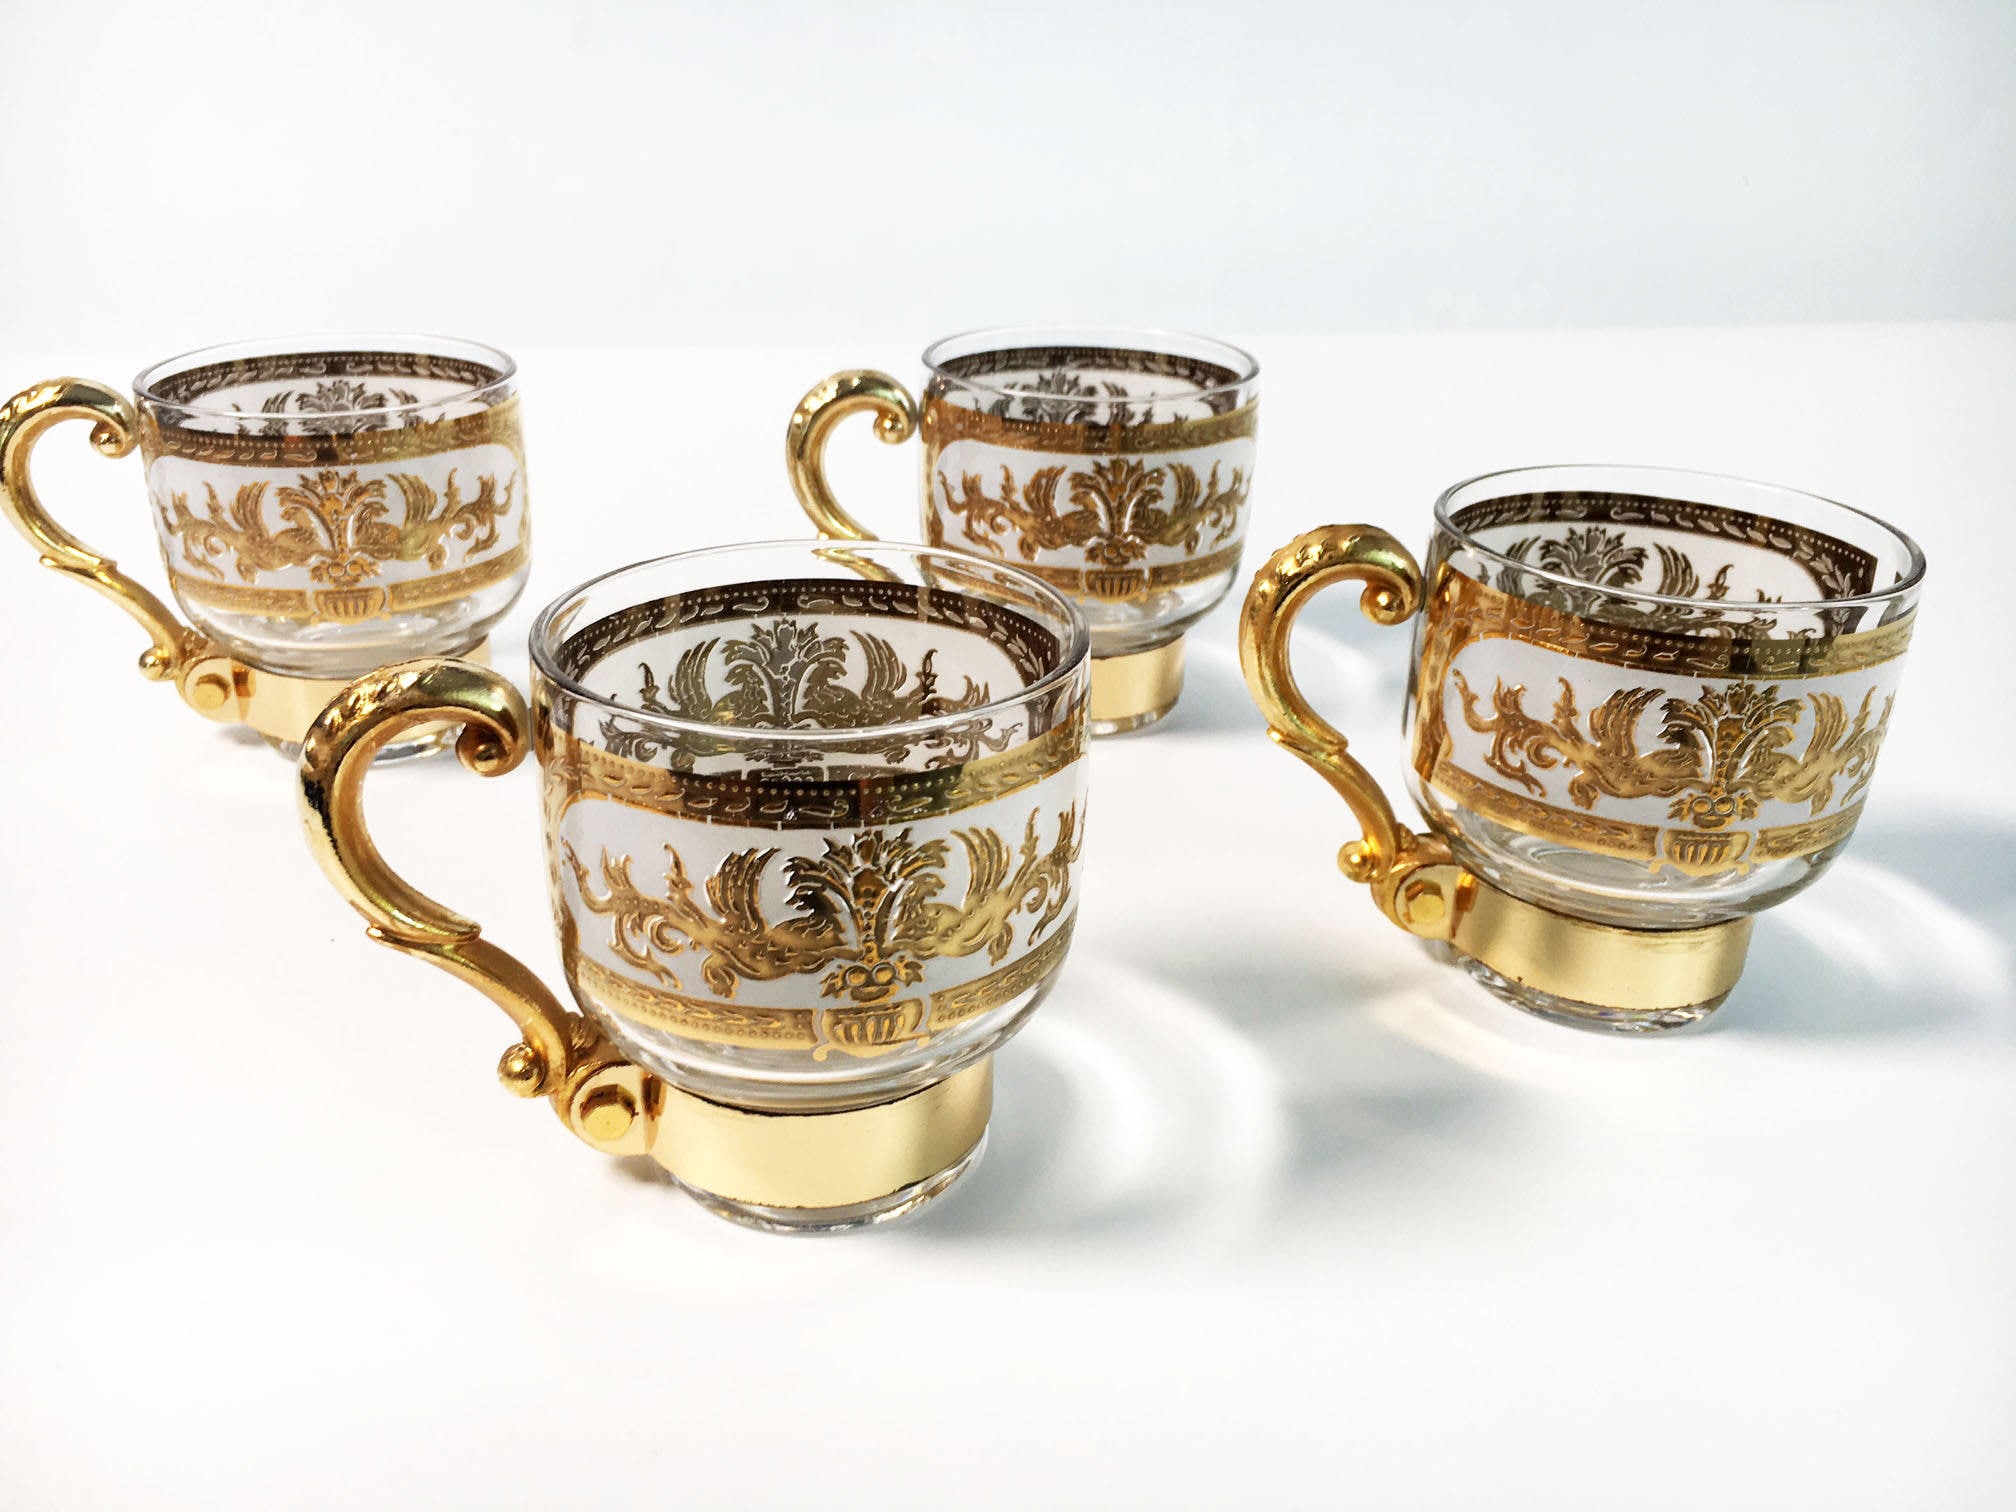 Vintage Gold Glass Coffee Mugs Set Of 4 Clear Dragon Design Gold Handled Glasses Hollywood